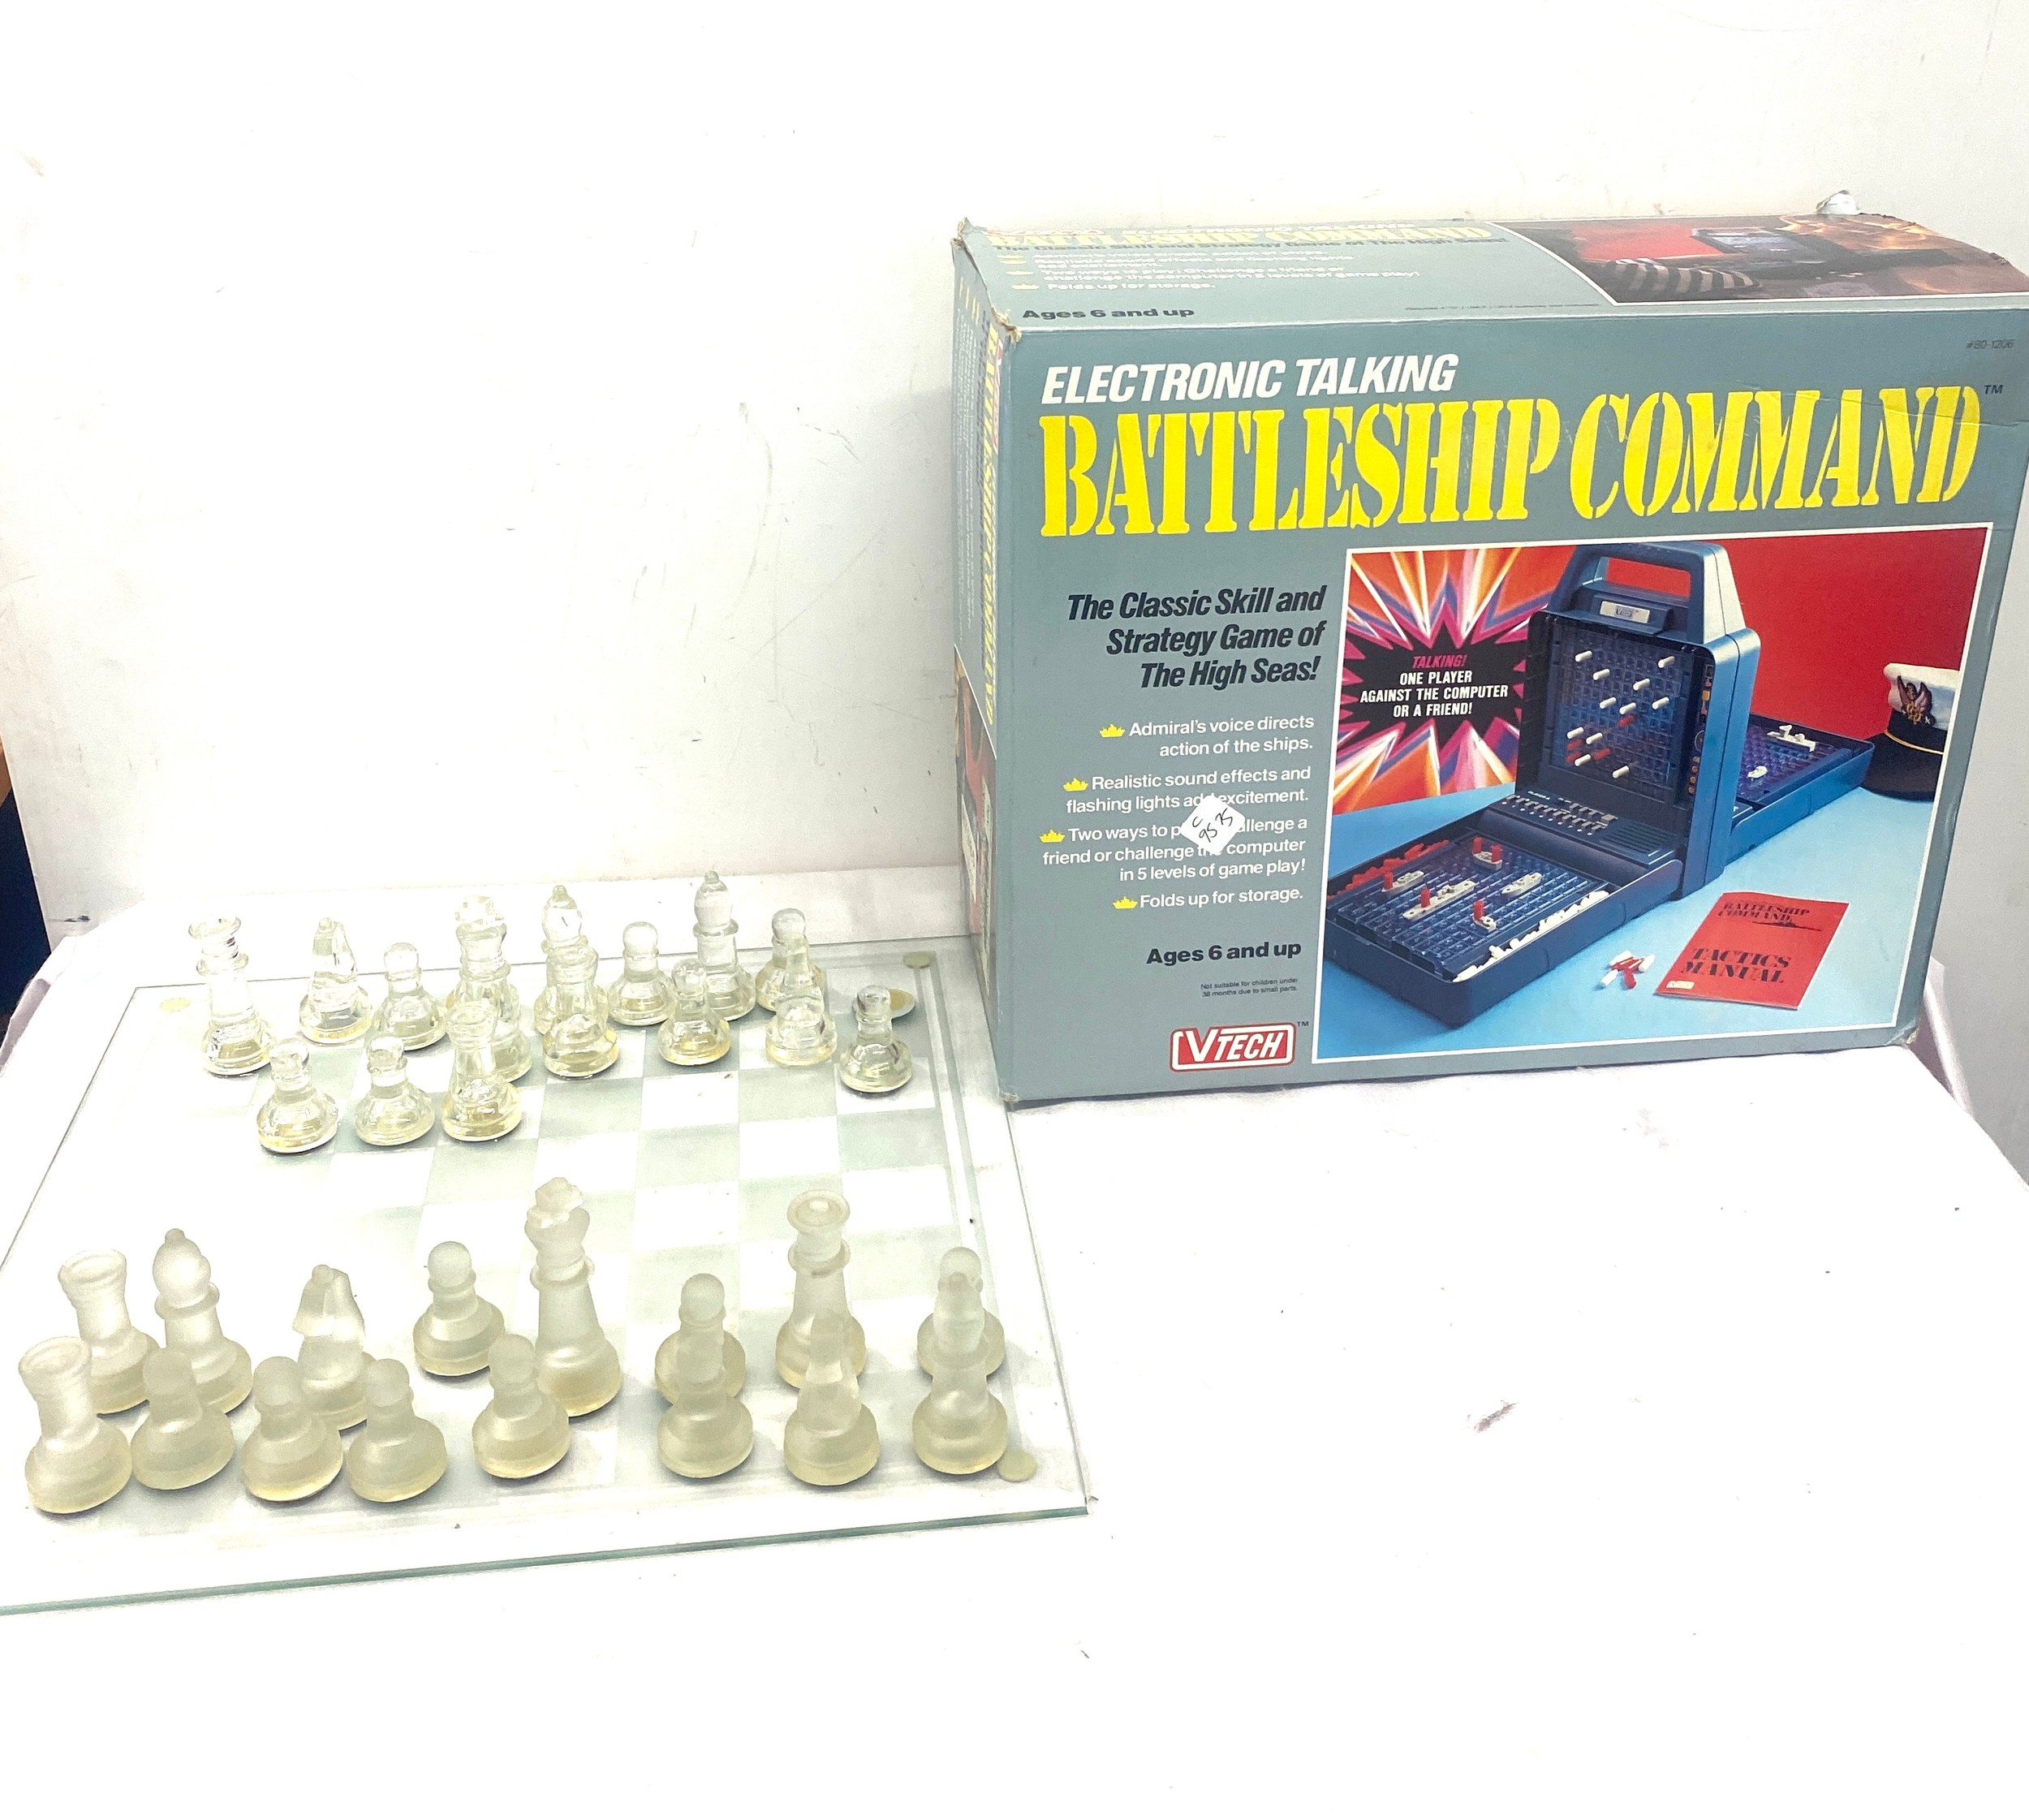 VTech Battleship Command - Electronic Talking Vintage/Retro 1990 Game and complete glass chest board